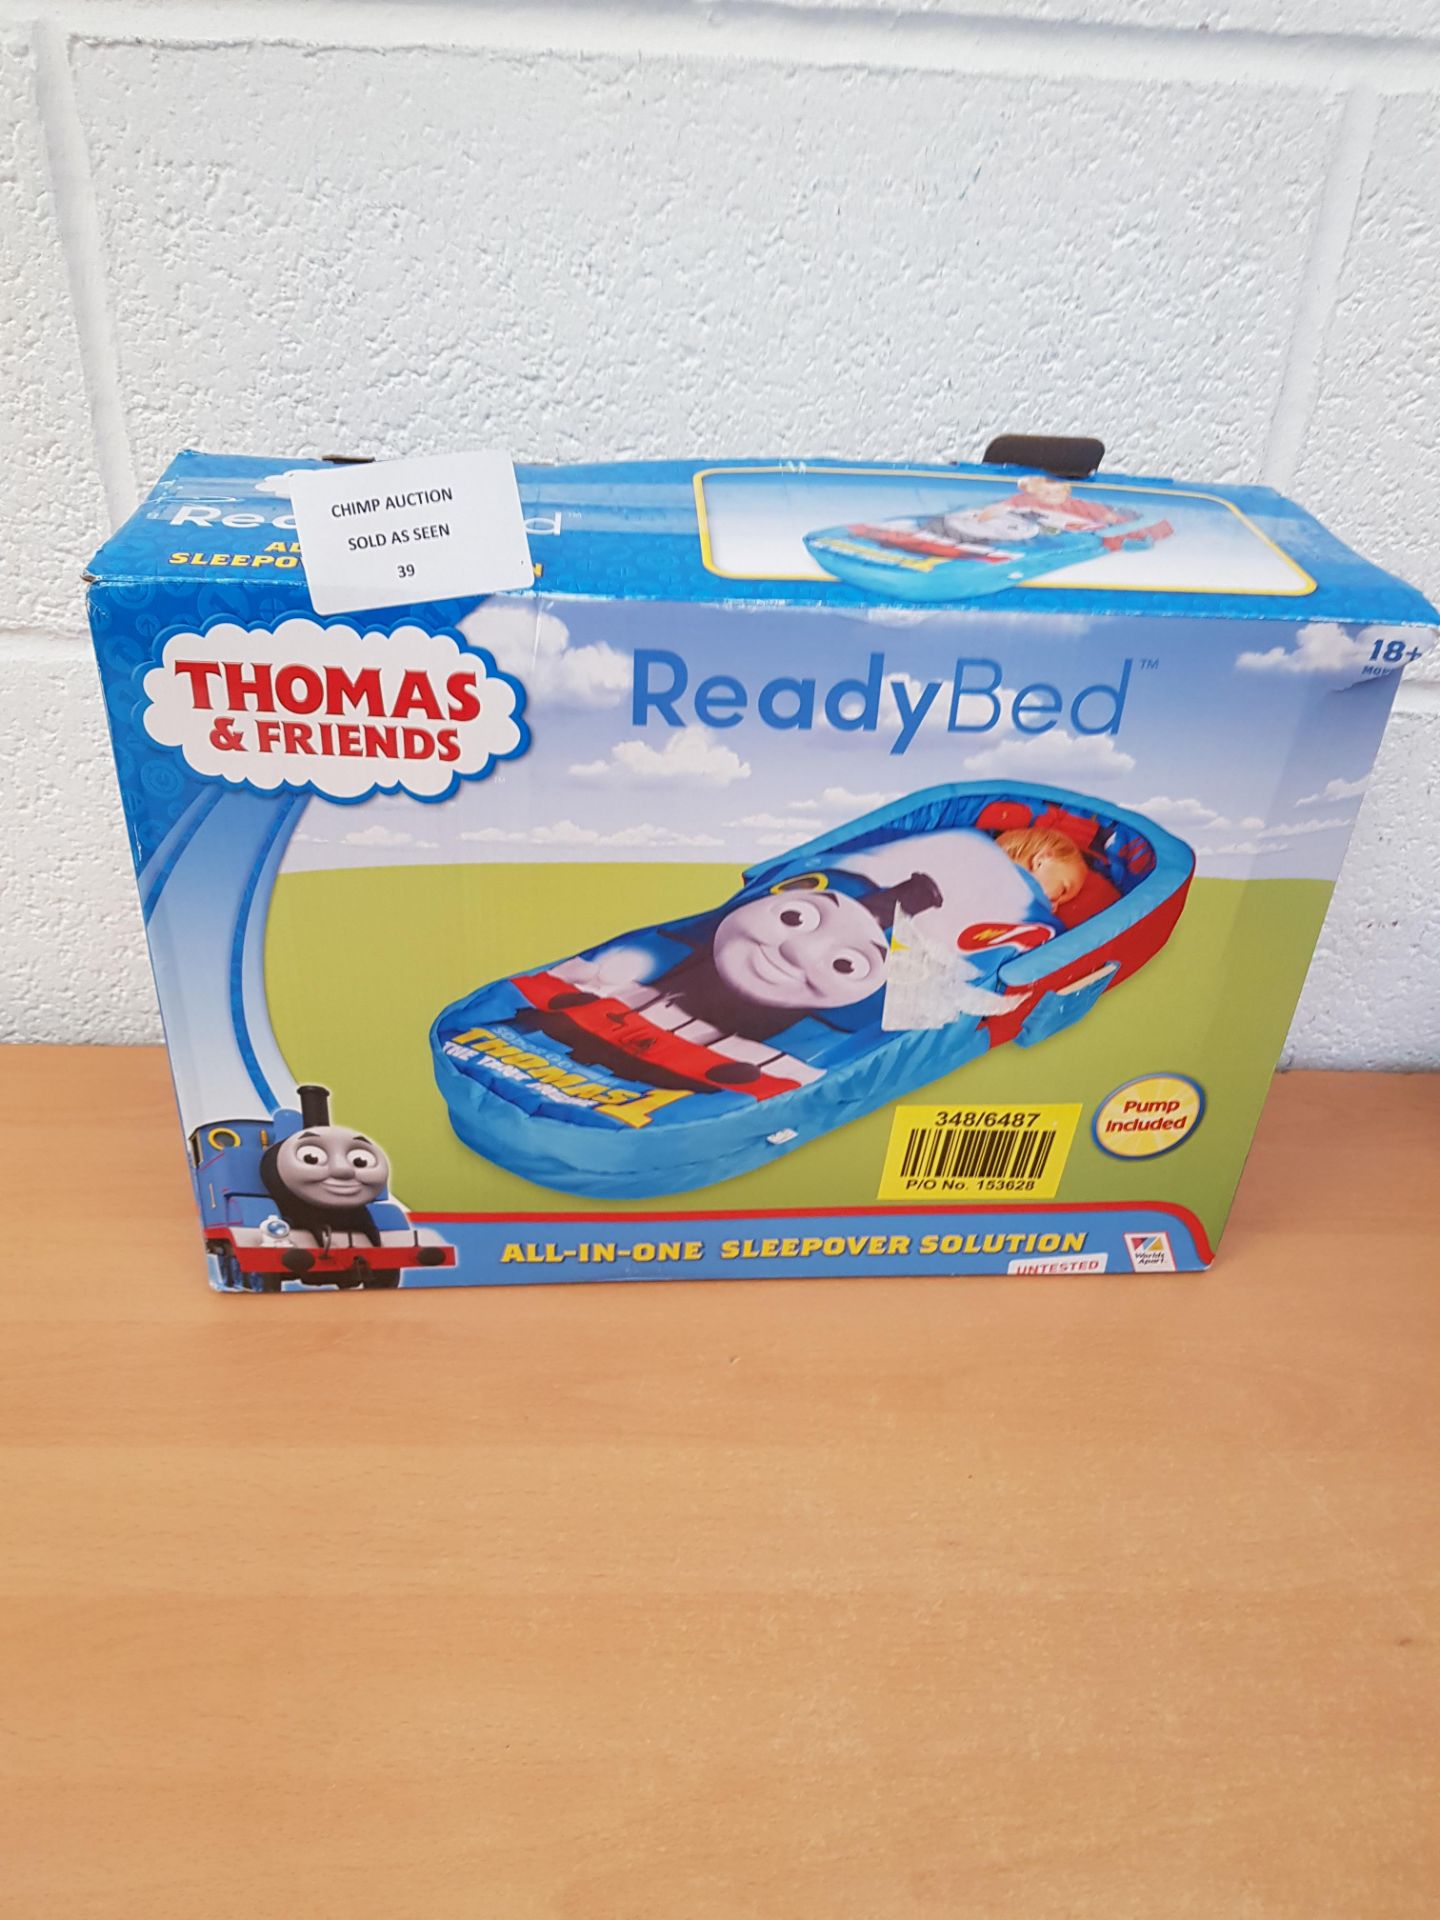 Thomas & Friends Ready Bed all in one Sleepover solution